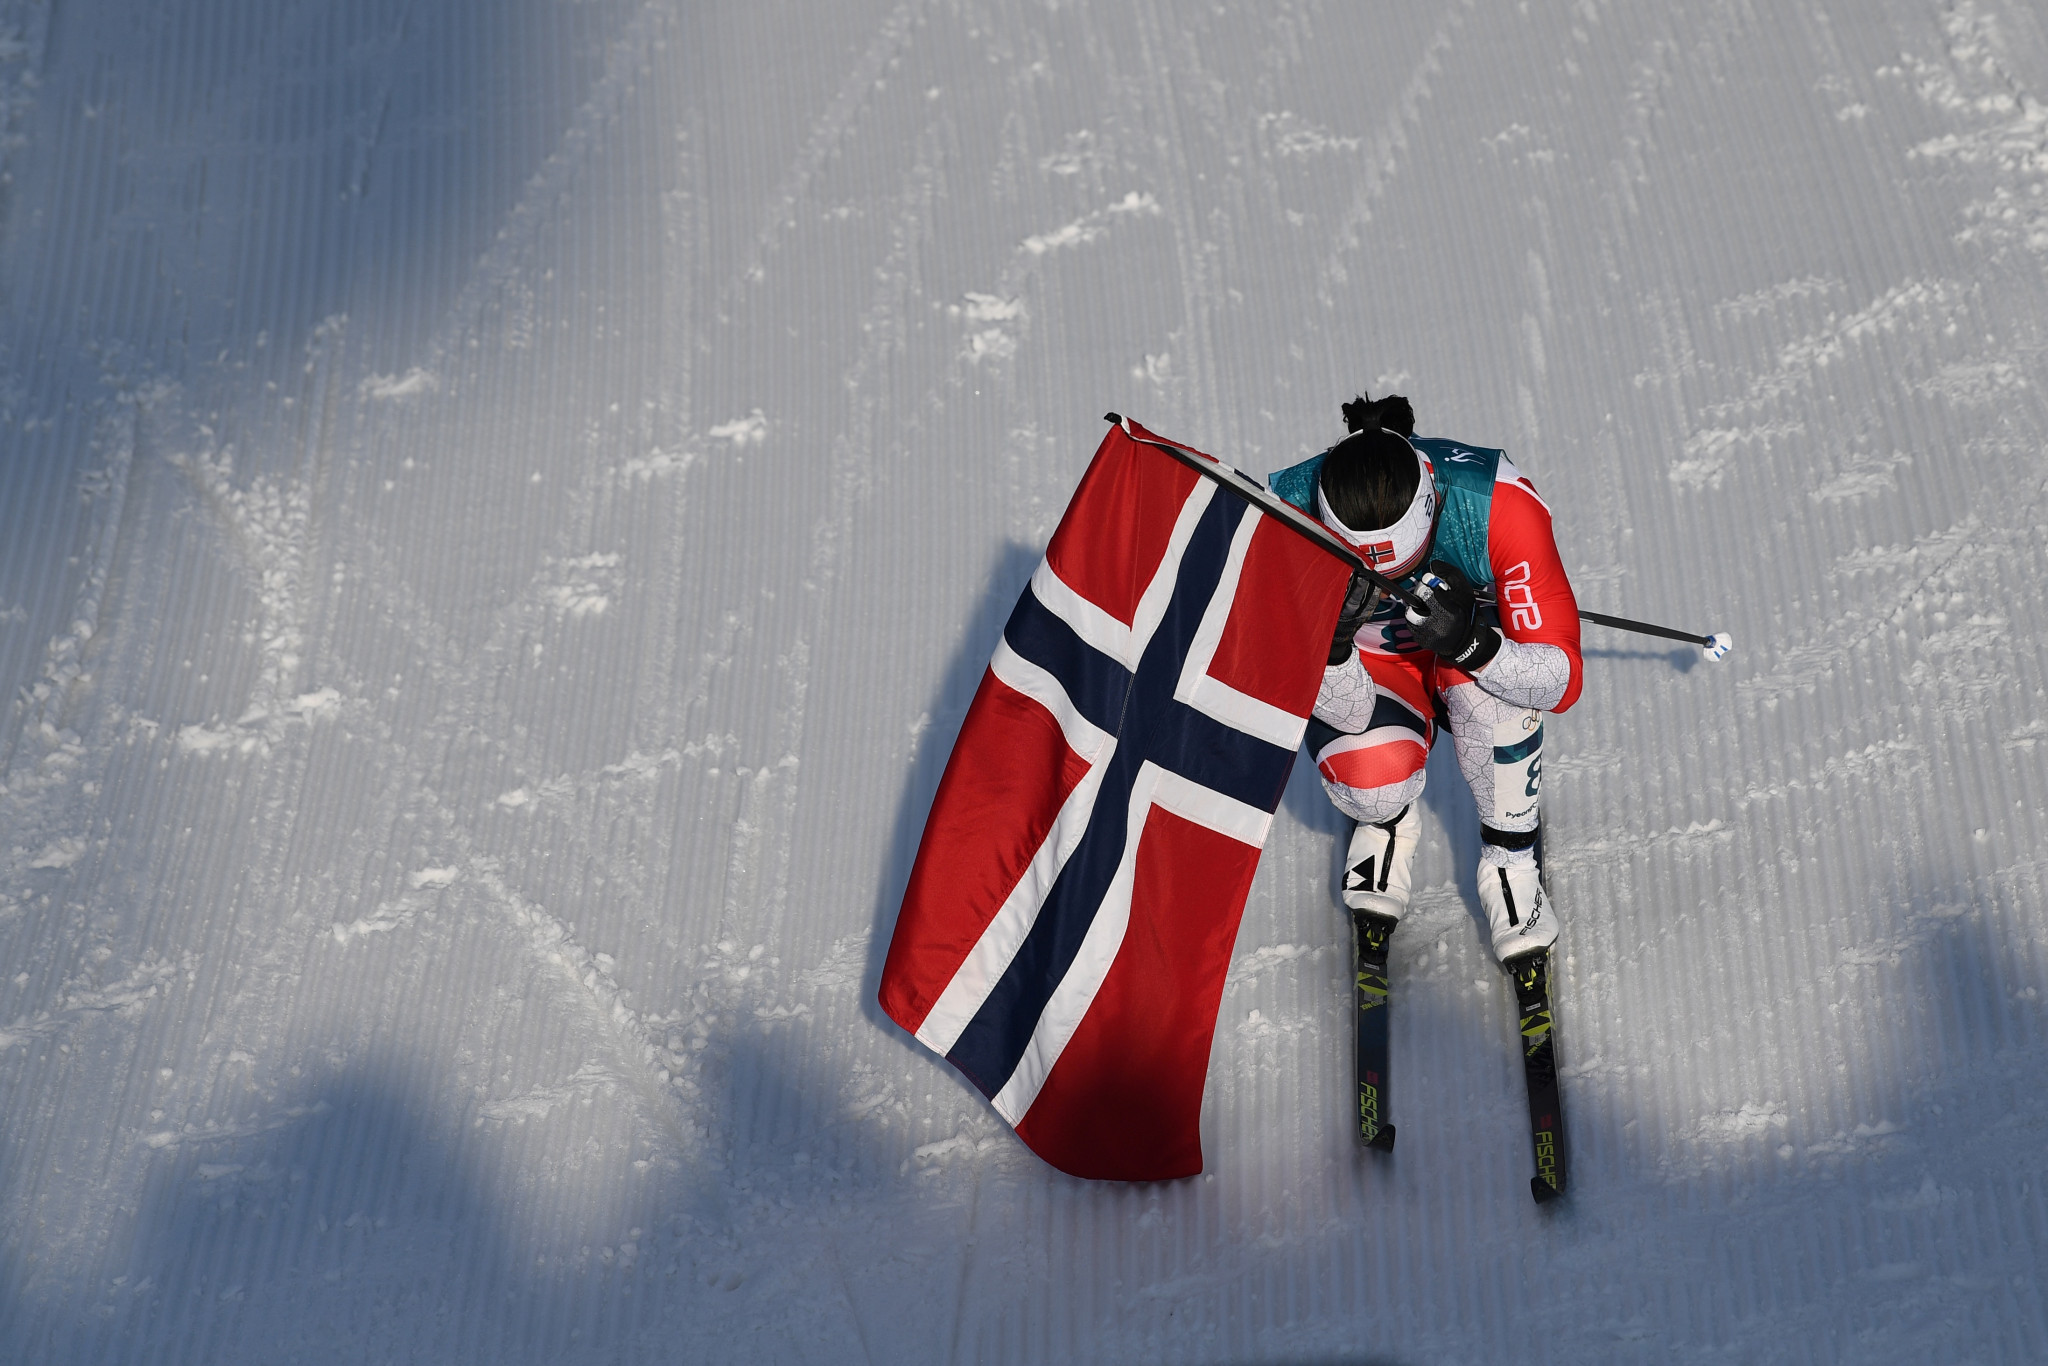 Norwegian Ski Federation refuses to participate in autumn meetings with Russia and Belarus